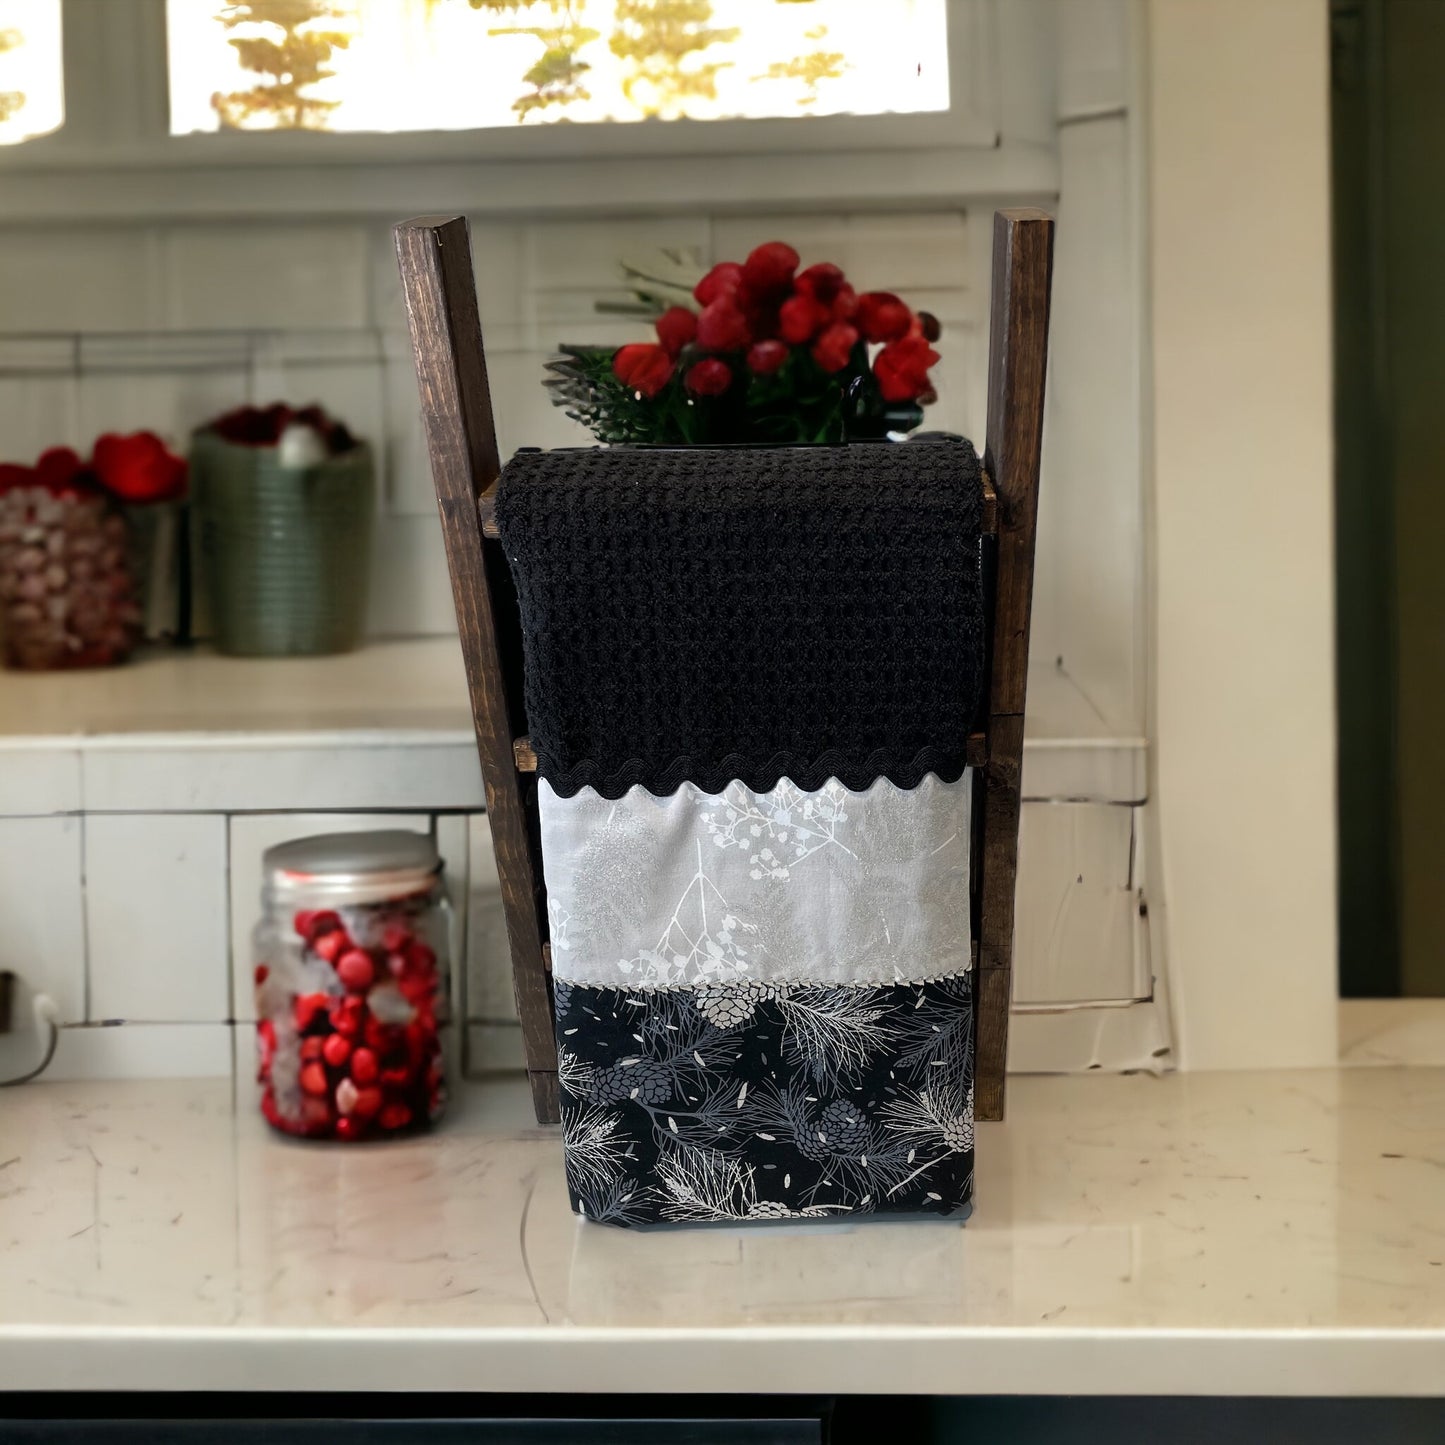 Stunning Handmade Christmas Kitchen Tea Towel in Black and Silver